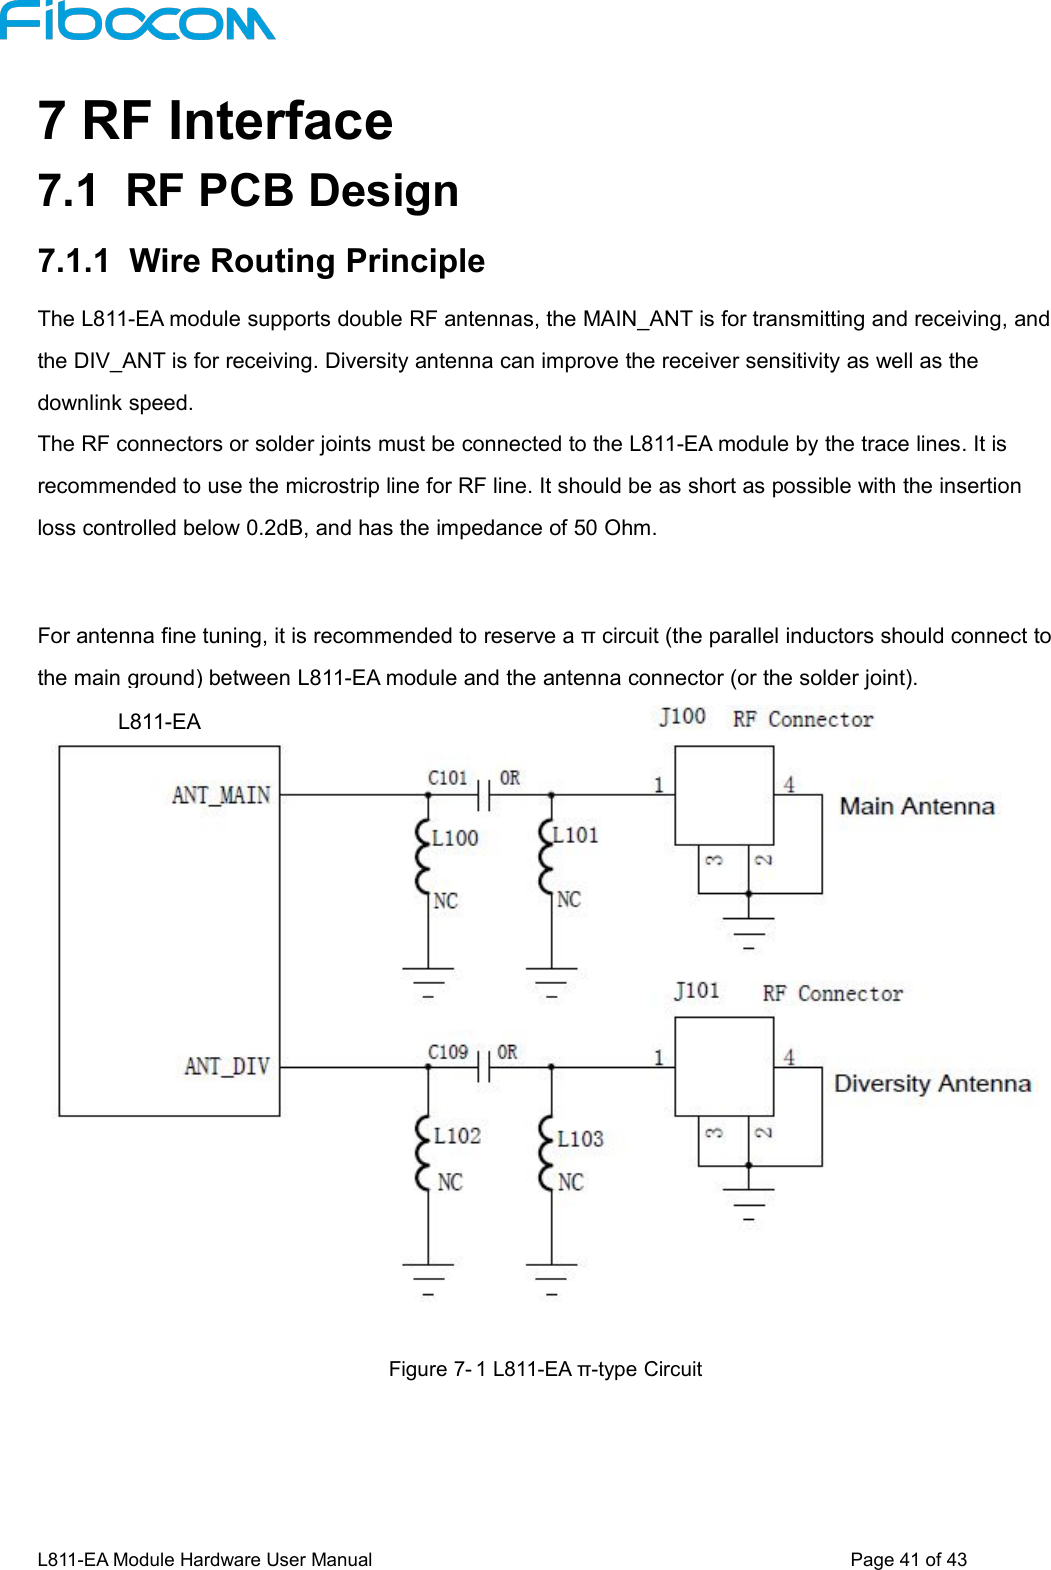 L811-EA Module Hardware User Manual Page41of437 RF Interface7.1 RF PCB Design7.1.1 Wire Routing PrincipleThe L811-EA module supports double RF antennas, the MAIN_ANT is for transmitting and receiving, andthe DIV_ANT is for receiving. Diversity antenna can improve the receiver sensitivity as well as thedownlink speed.The RF connectors or solder joints must be connected to the L811-EA module by the trace lines. It isrecommended to use the microstrip line for RF line. It should be as short as possible with the insertionloss controlled below 0.2dB, and has the impedance of 50 Ohm.For antenna fine tuning, it is recommended to reserve a π circuit (the parallel inductors should connect tothe main ground) between L811-EA module and the antenna connector (or the solder joint).Figure 7- 1 L811-EA π-type CircuitL811-EA